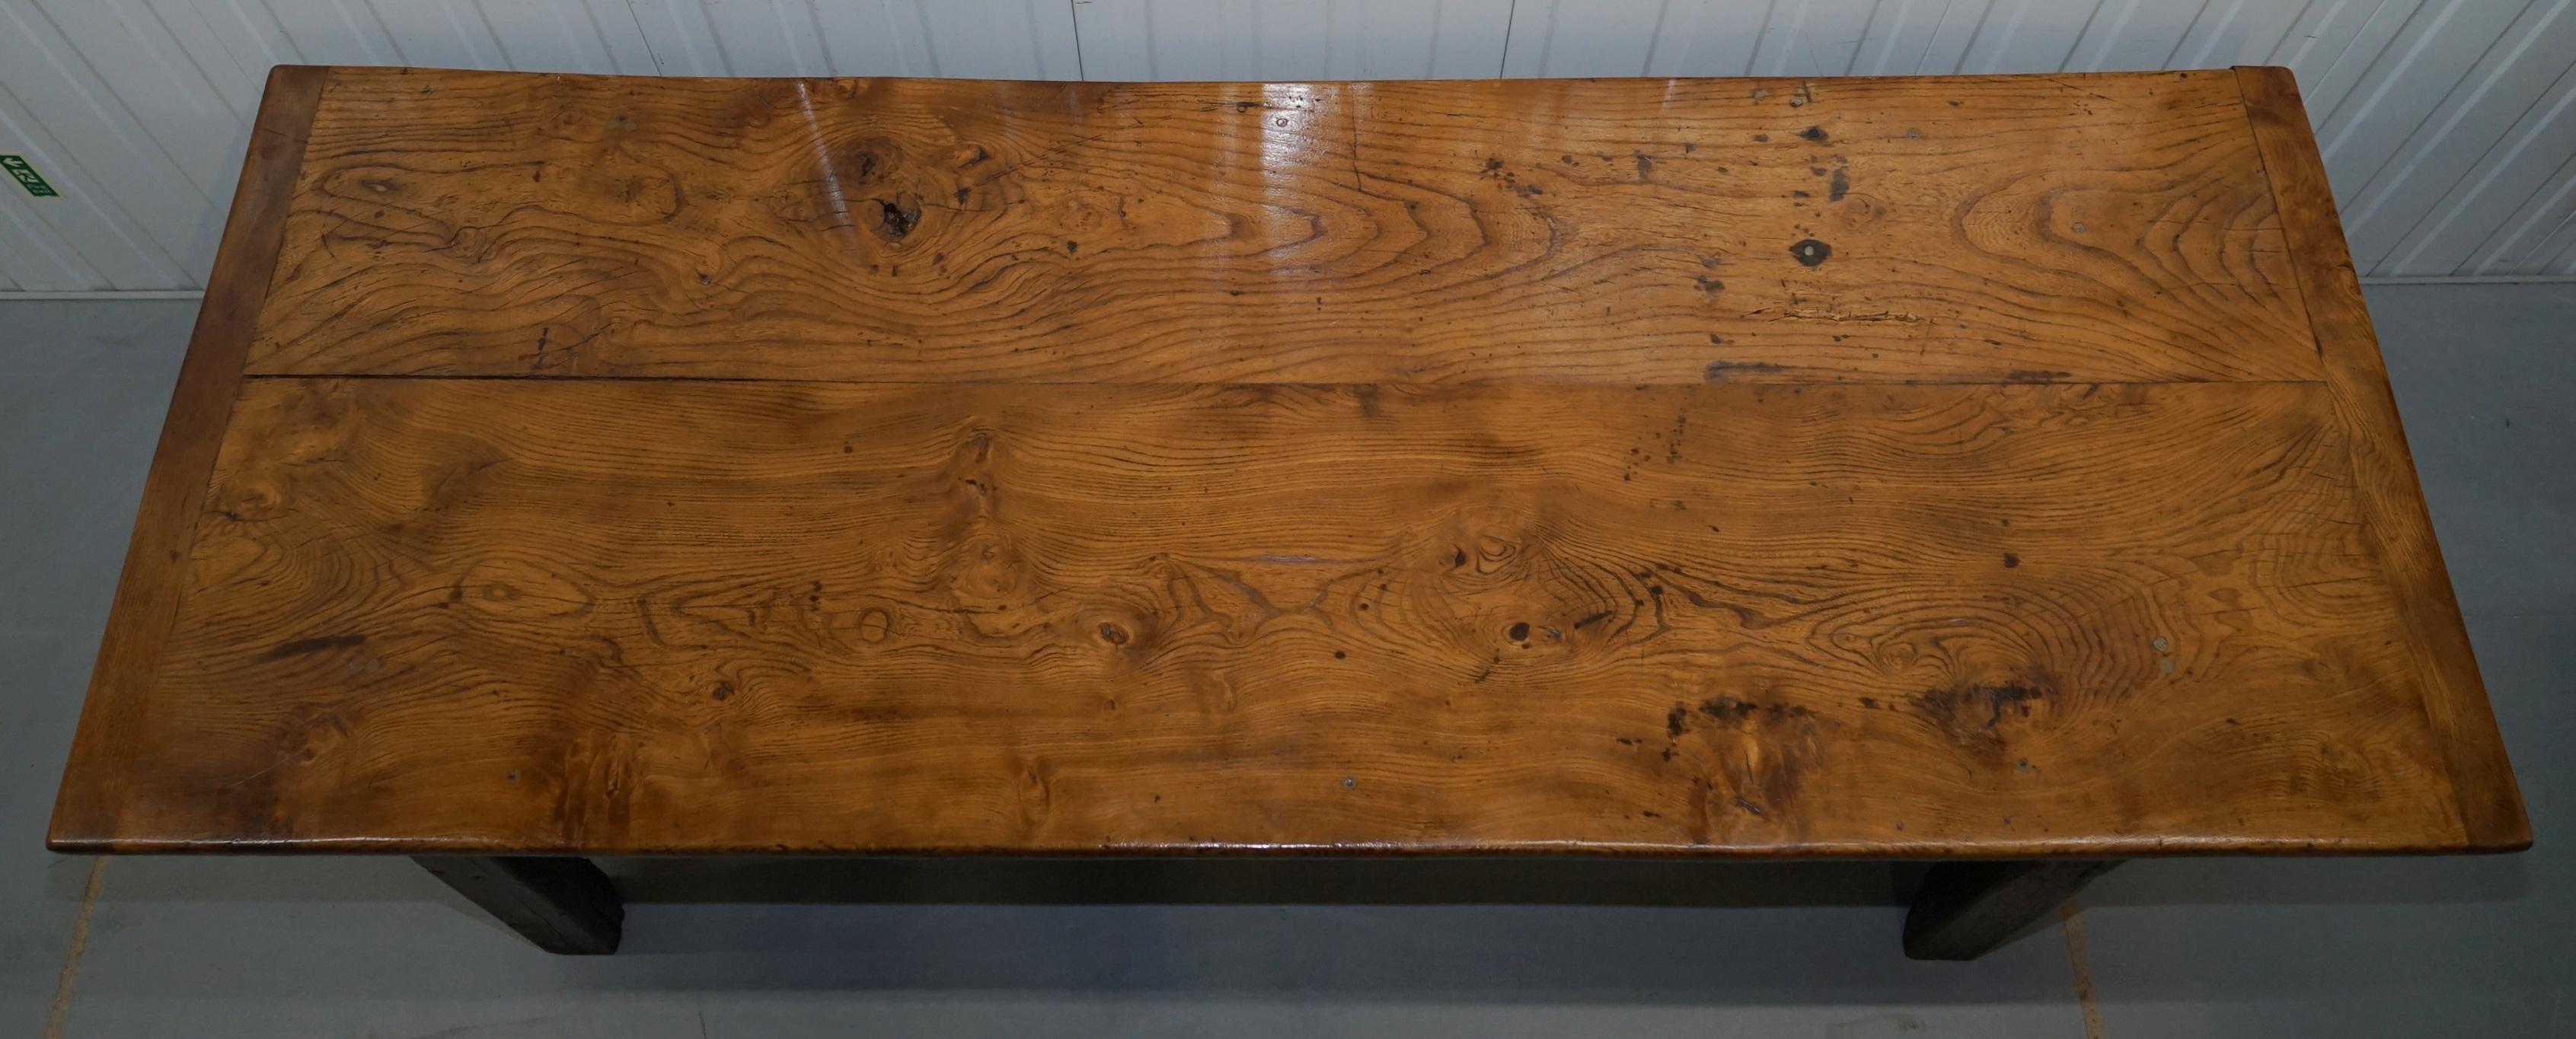 English Stunning Rare 18th Century Solid Elm 2 Plank Top Refectory Dining Table Seats